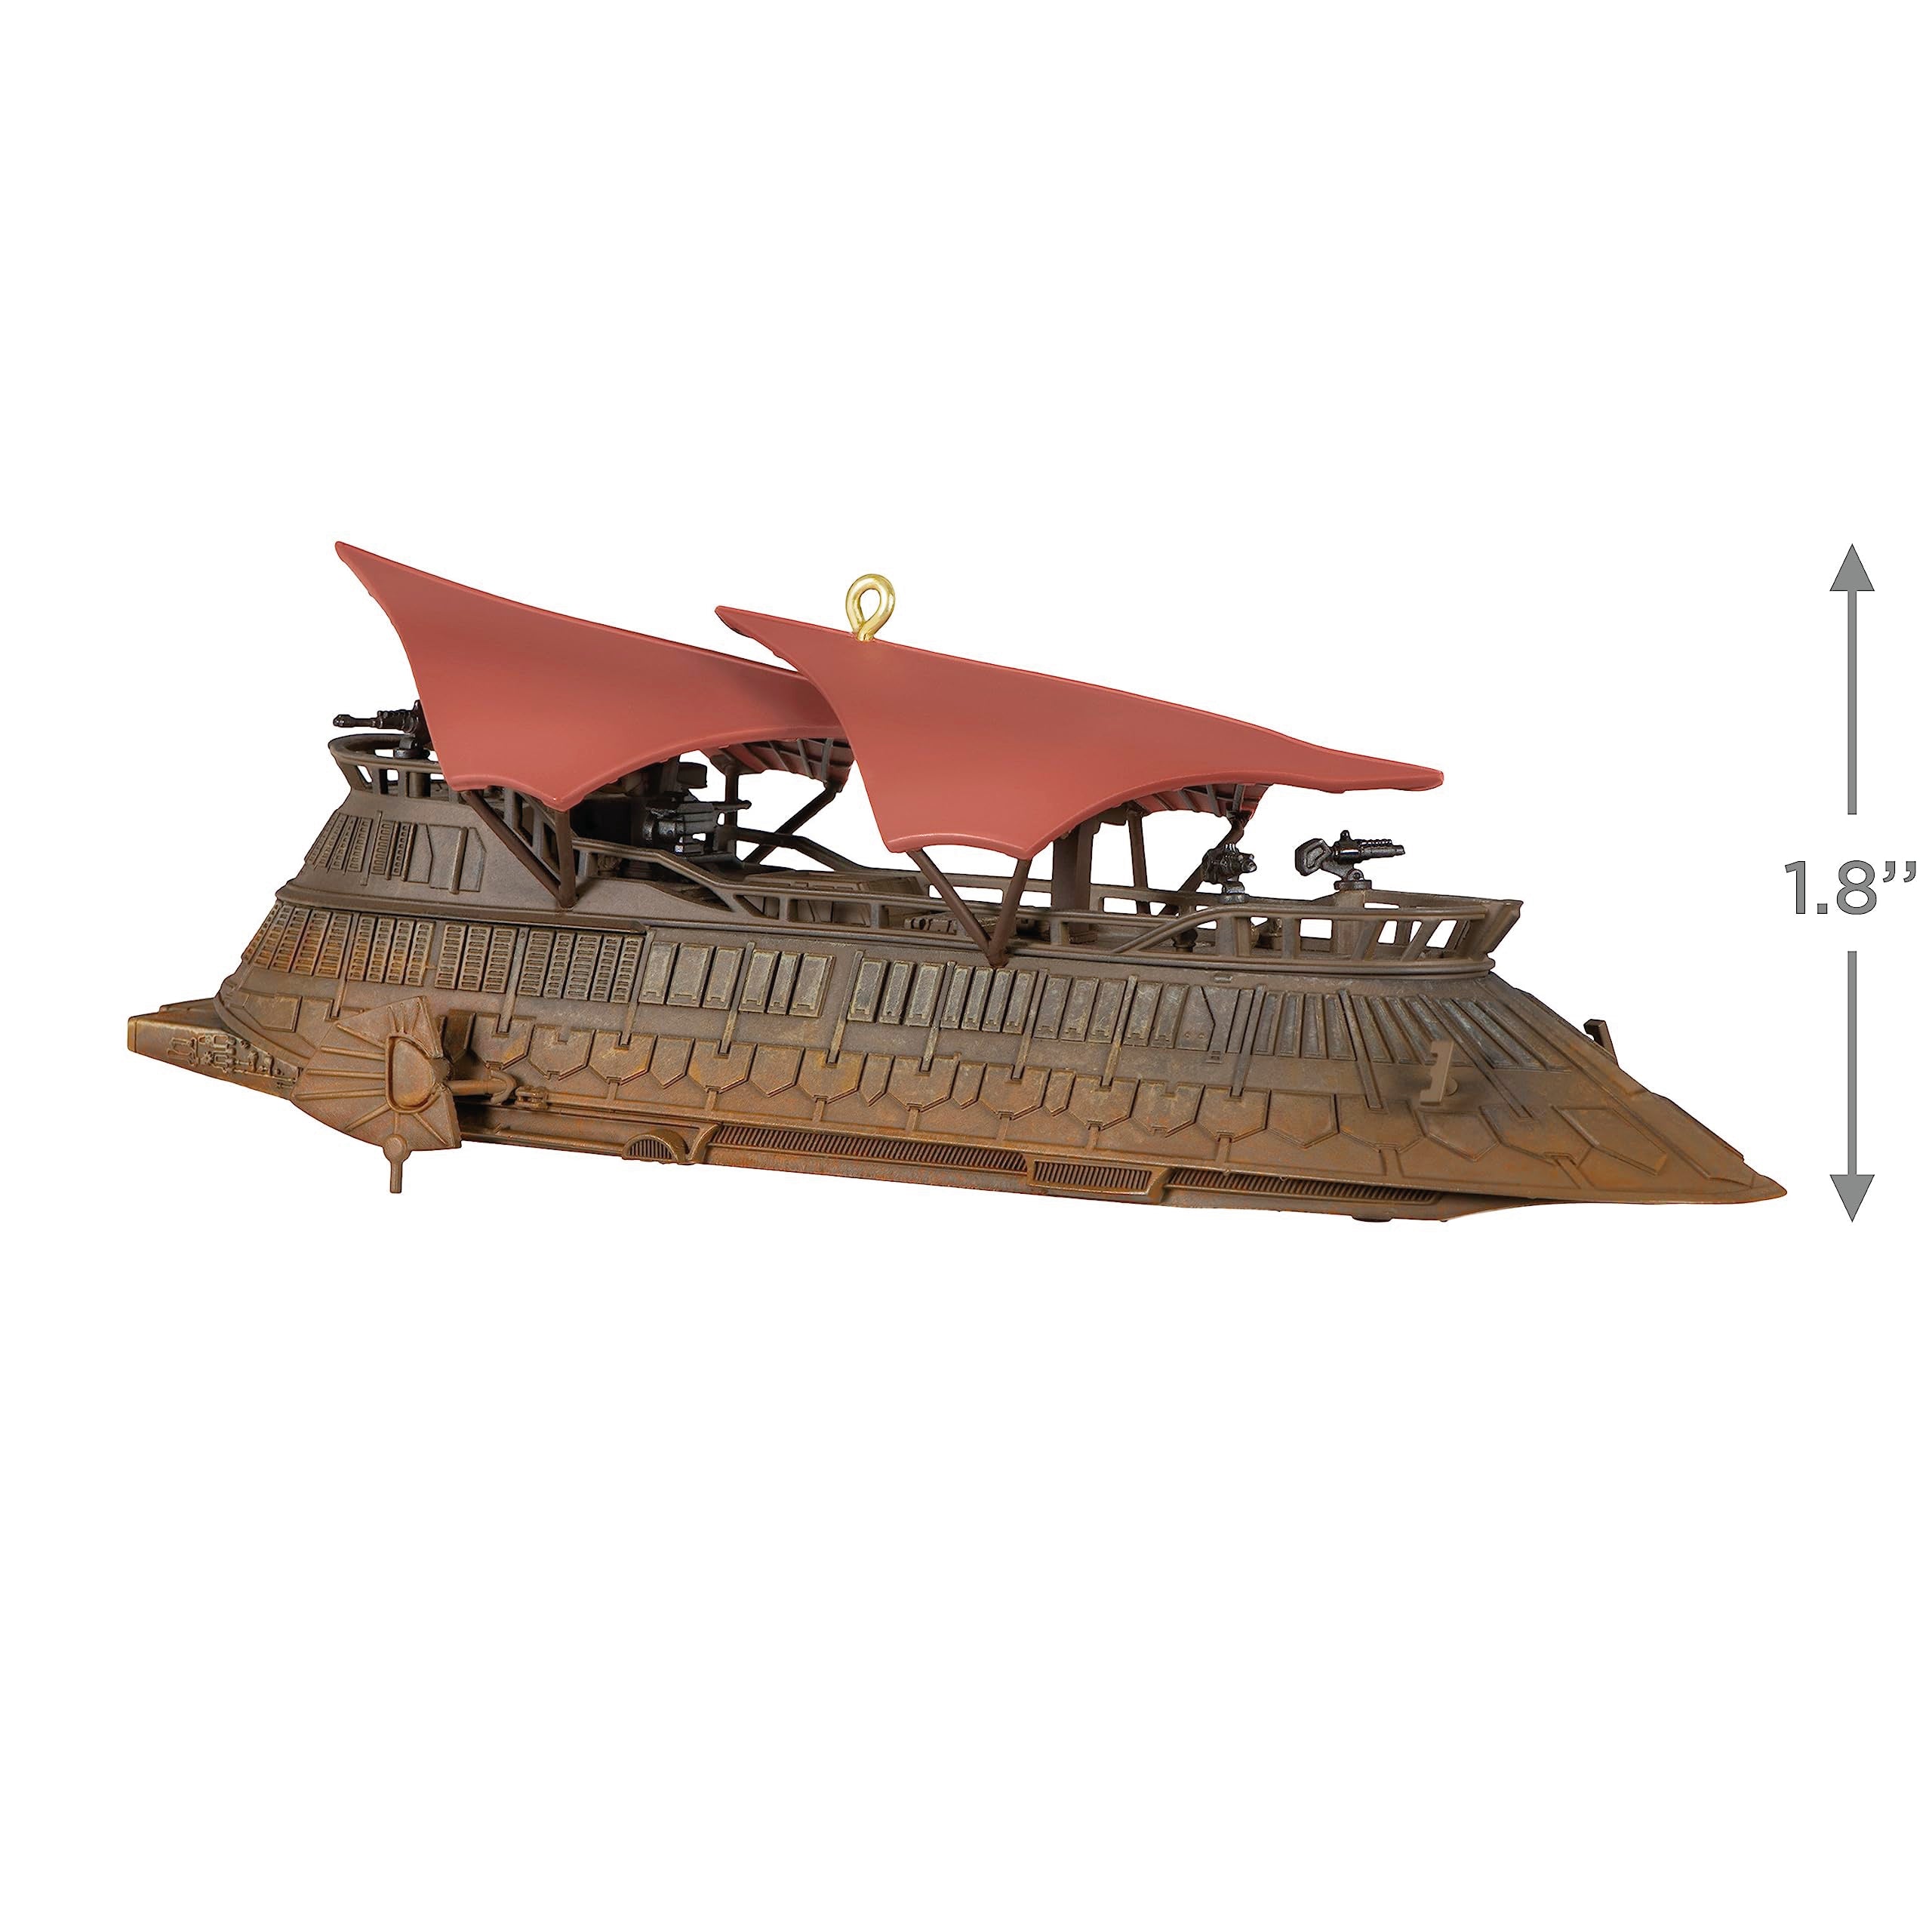 Hallmark Keepsake Christmas Ornament 2023, Star Wars: Return of The Jedi Jabba's Sail Barge, The Khetanna with Sound, Gifts for Star Wars Fans